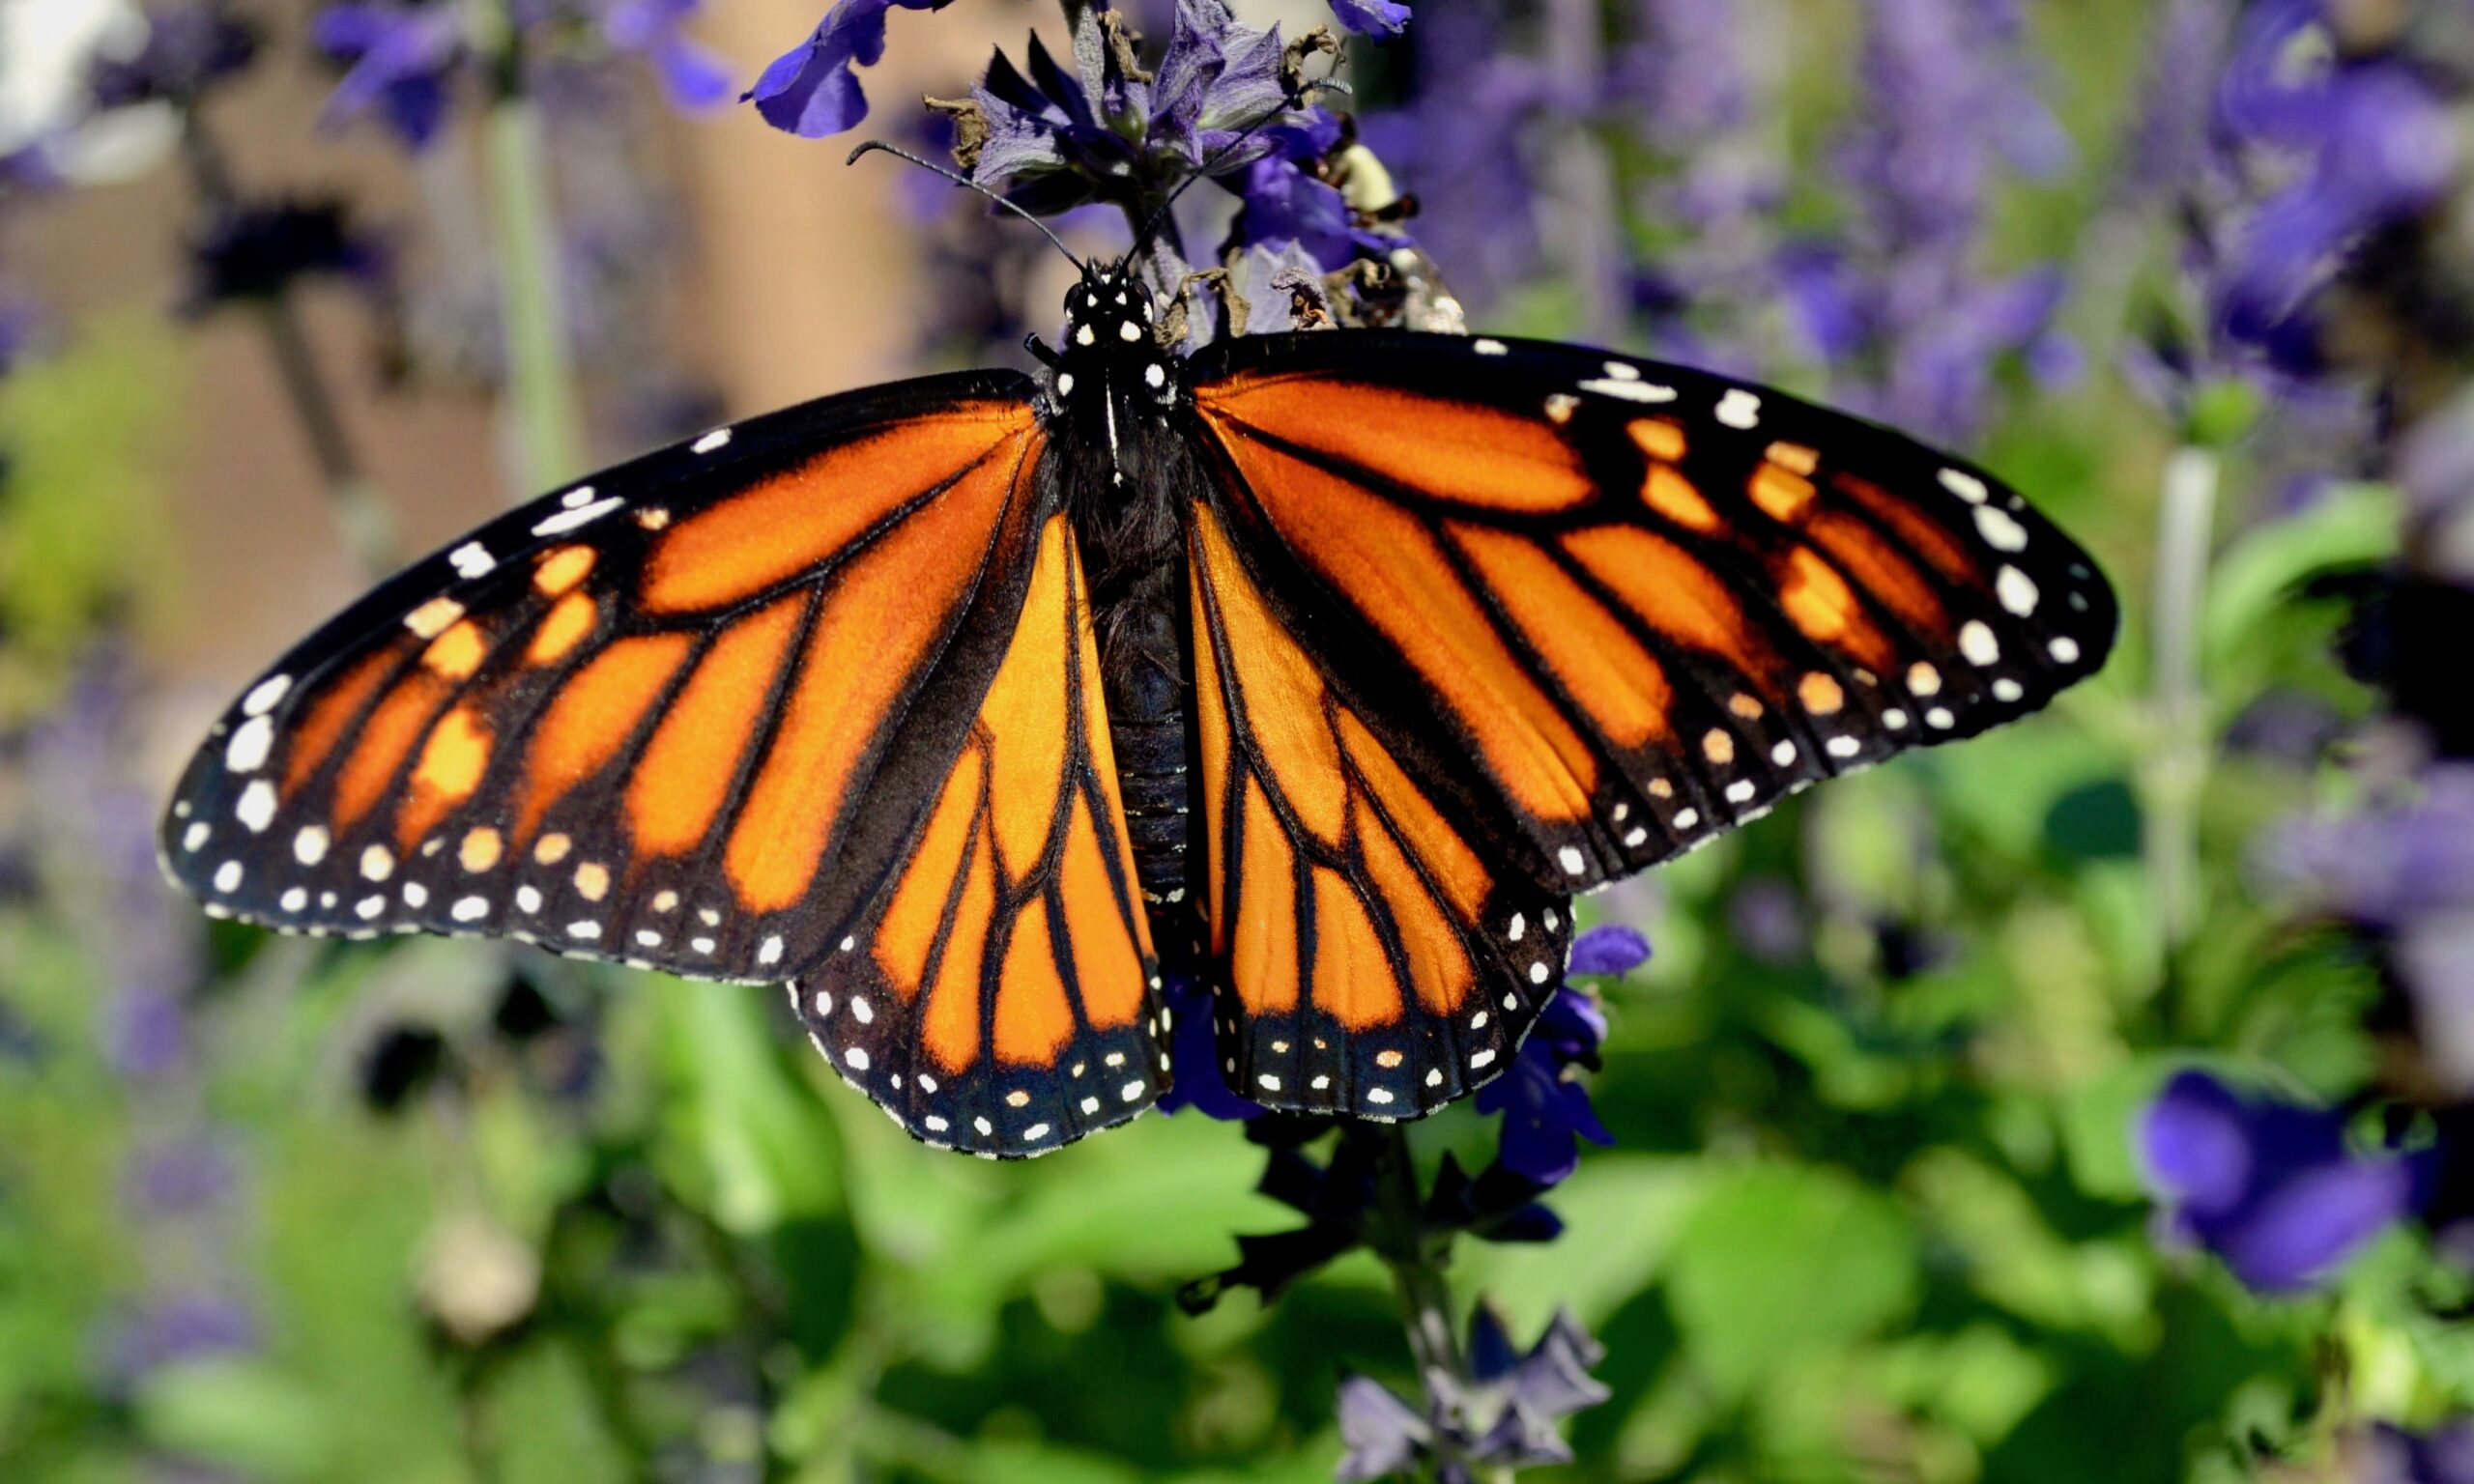 Adult Monarch butterfly on a flower